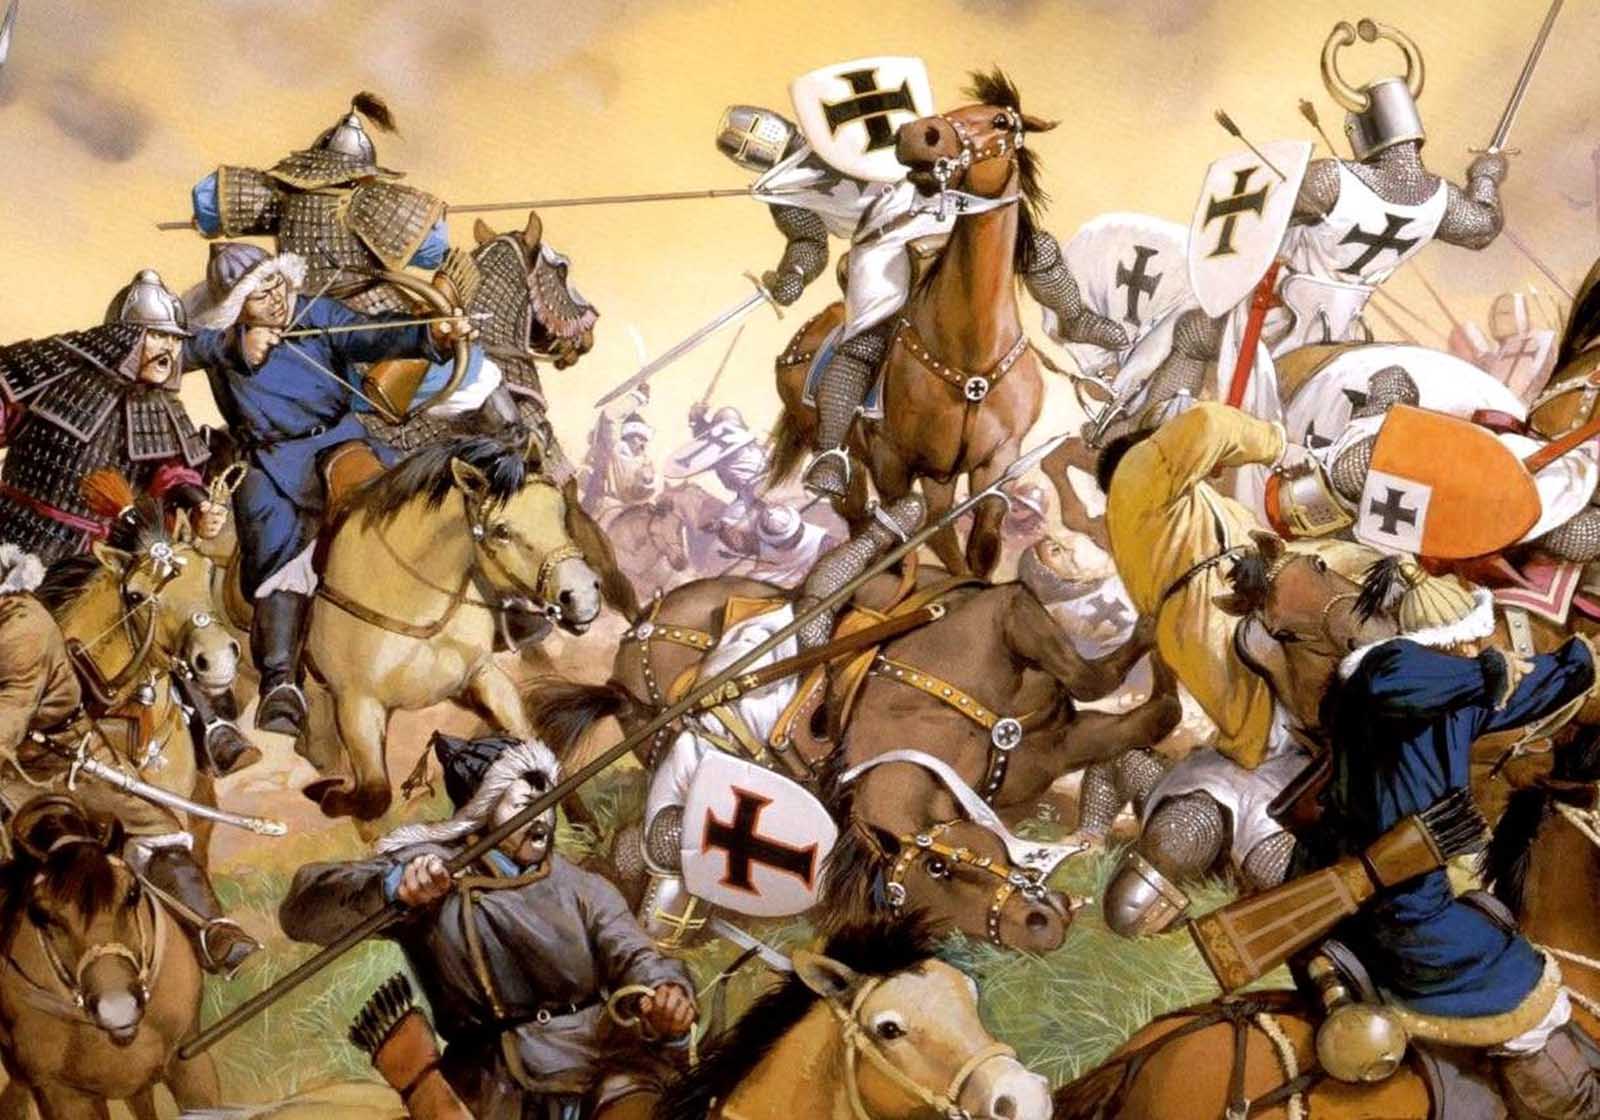 Was there much contact between the Crusader states and the Mongol empire?